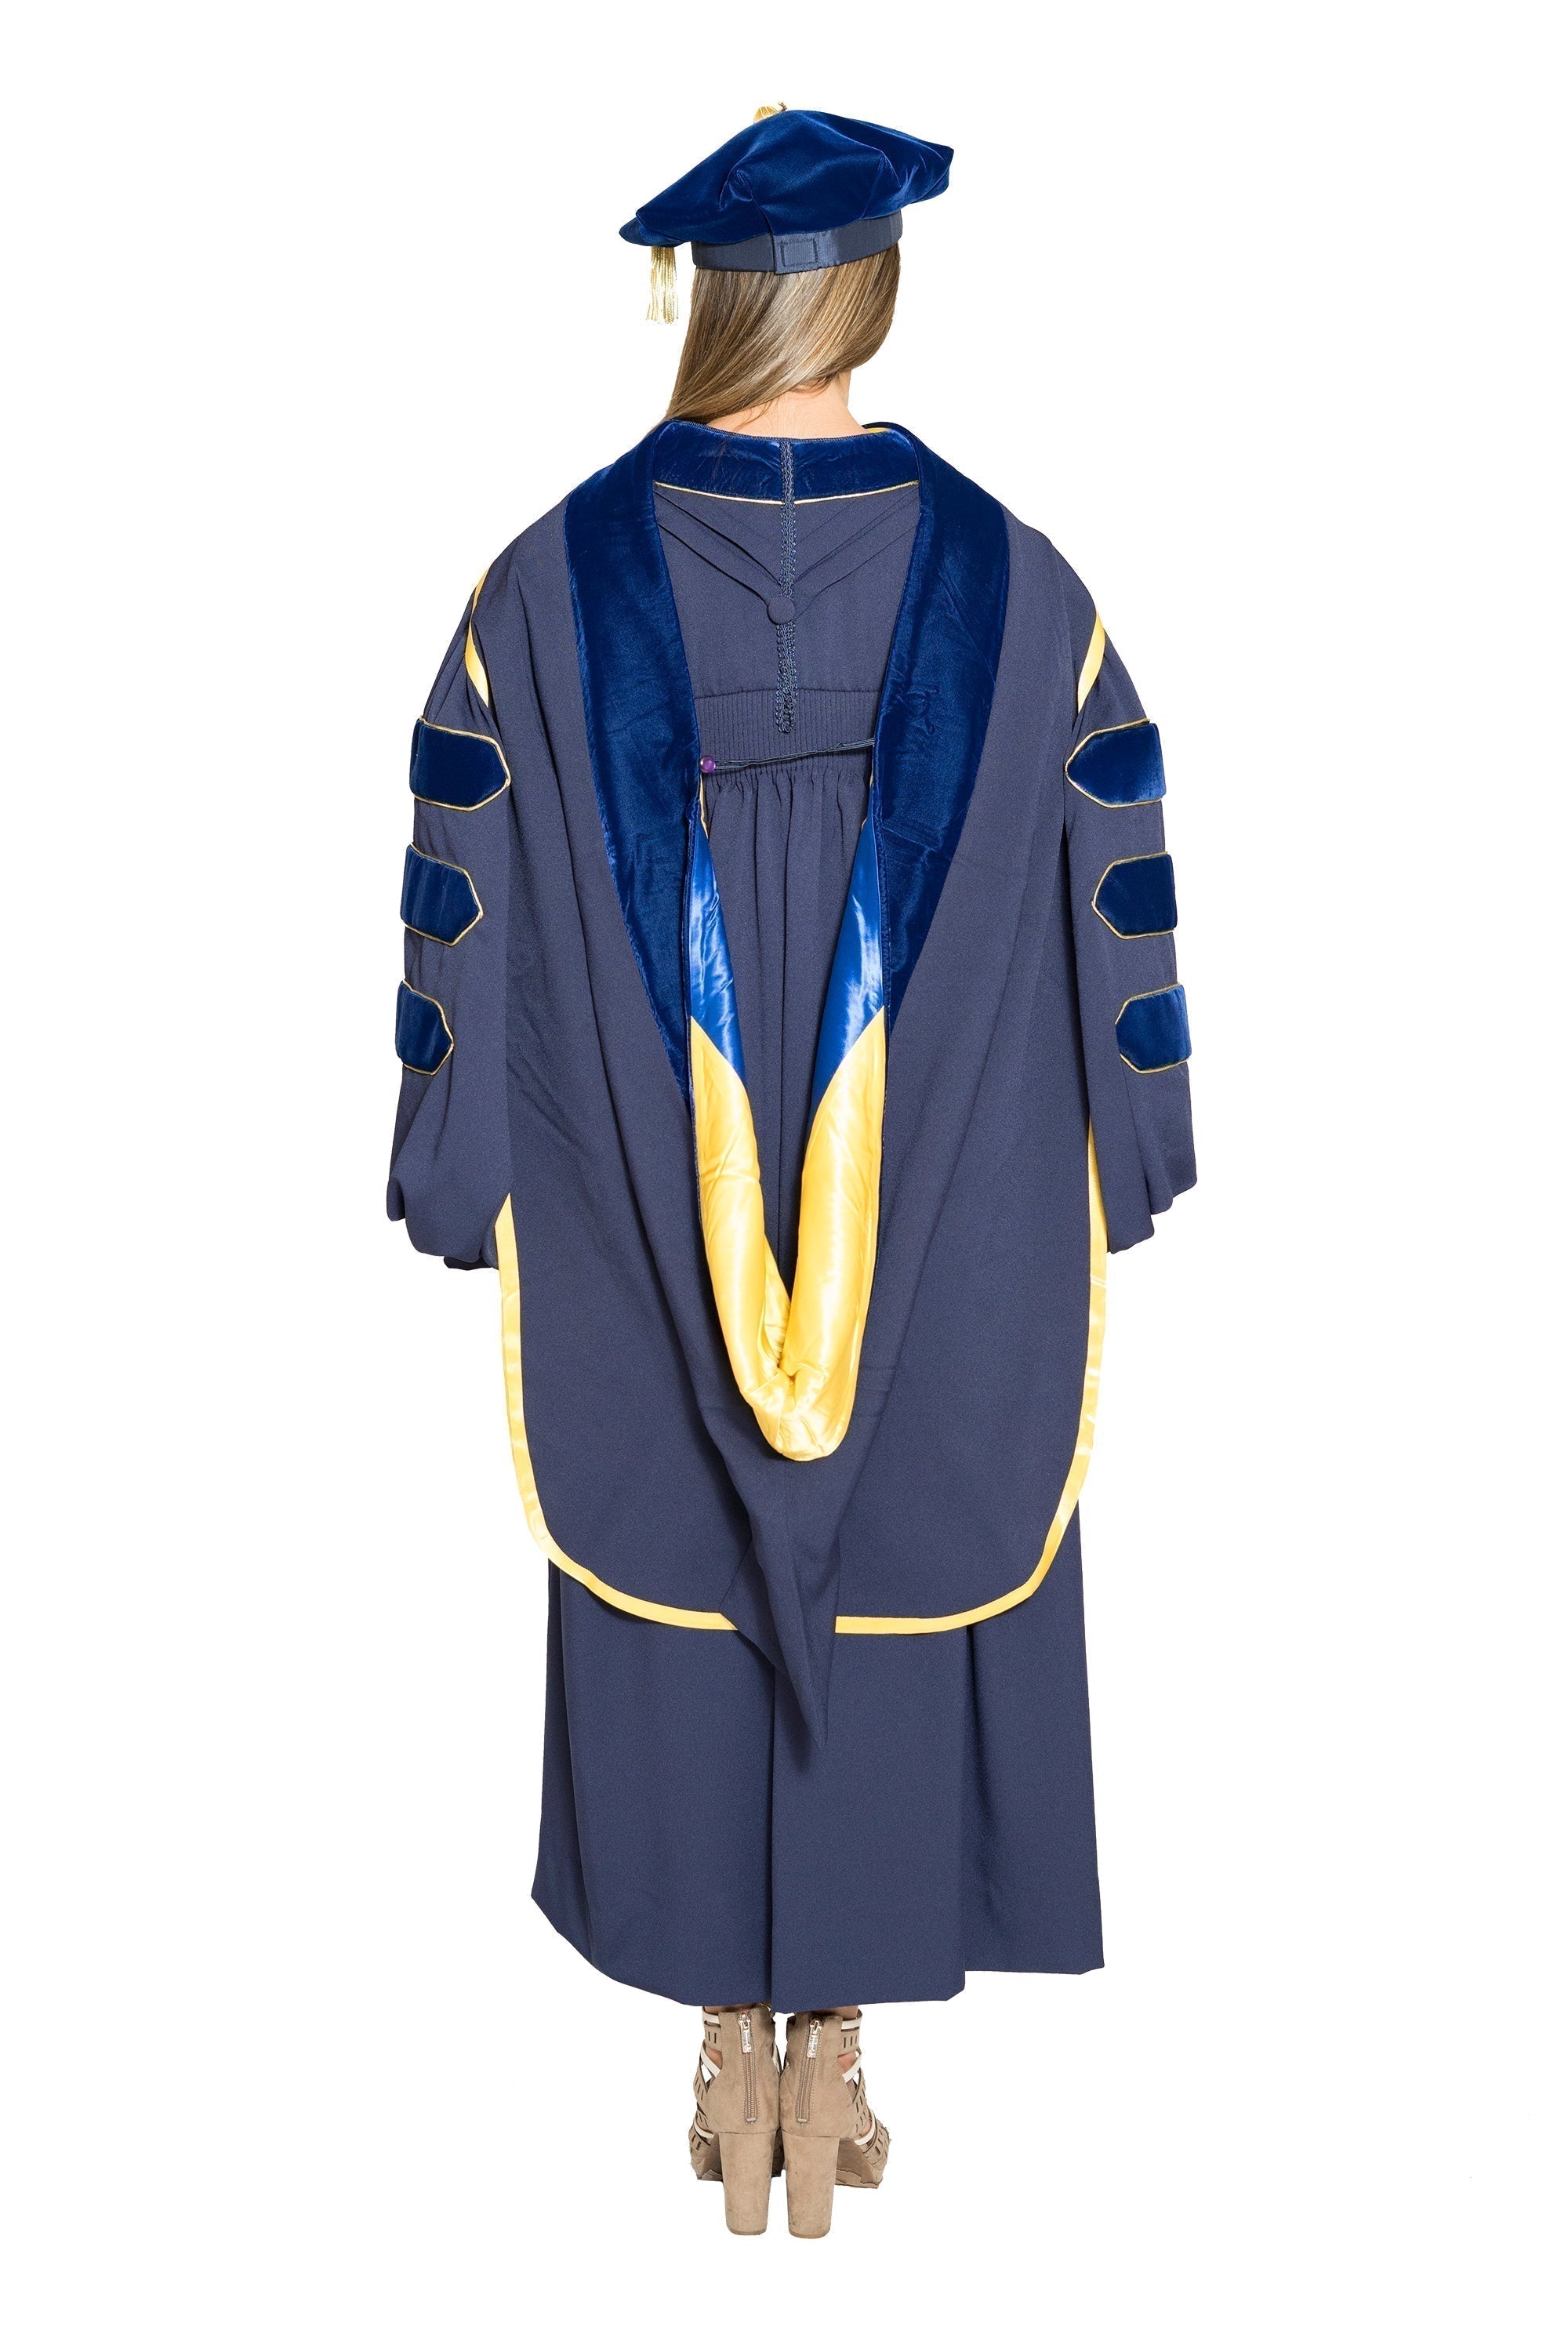 UC San Francisco Complete Doctoral Regalia - Doctoral Gown, PhD & M.D. Hood, and 8-sided Cap (Tam) with Tassel